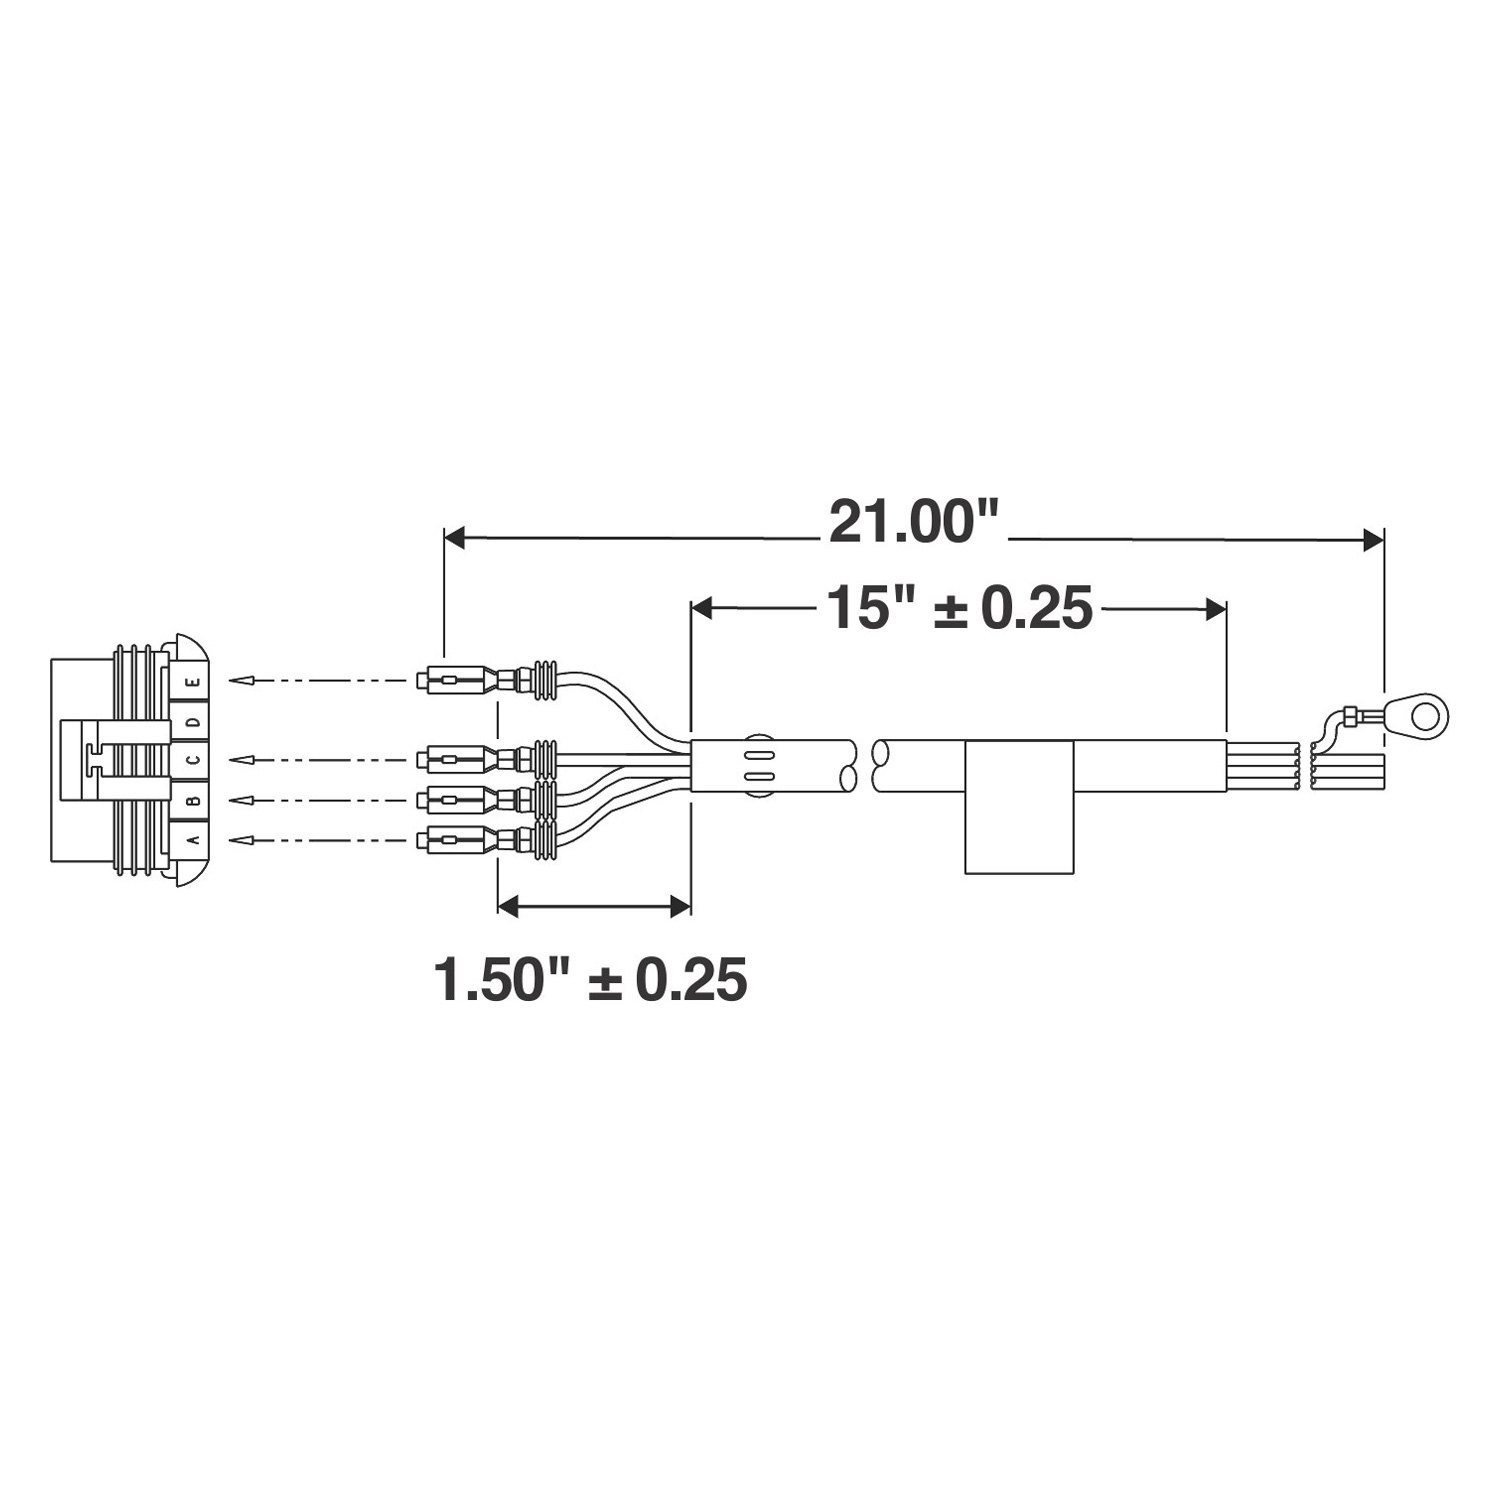 Signal Stat 900 Wiring Diagram - Wiring Diagram And Schematics - Signal Stat 900 Wiring Diagram